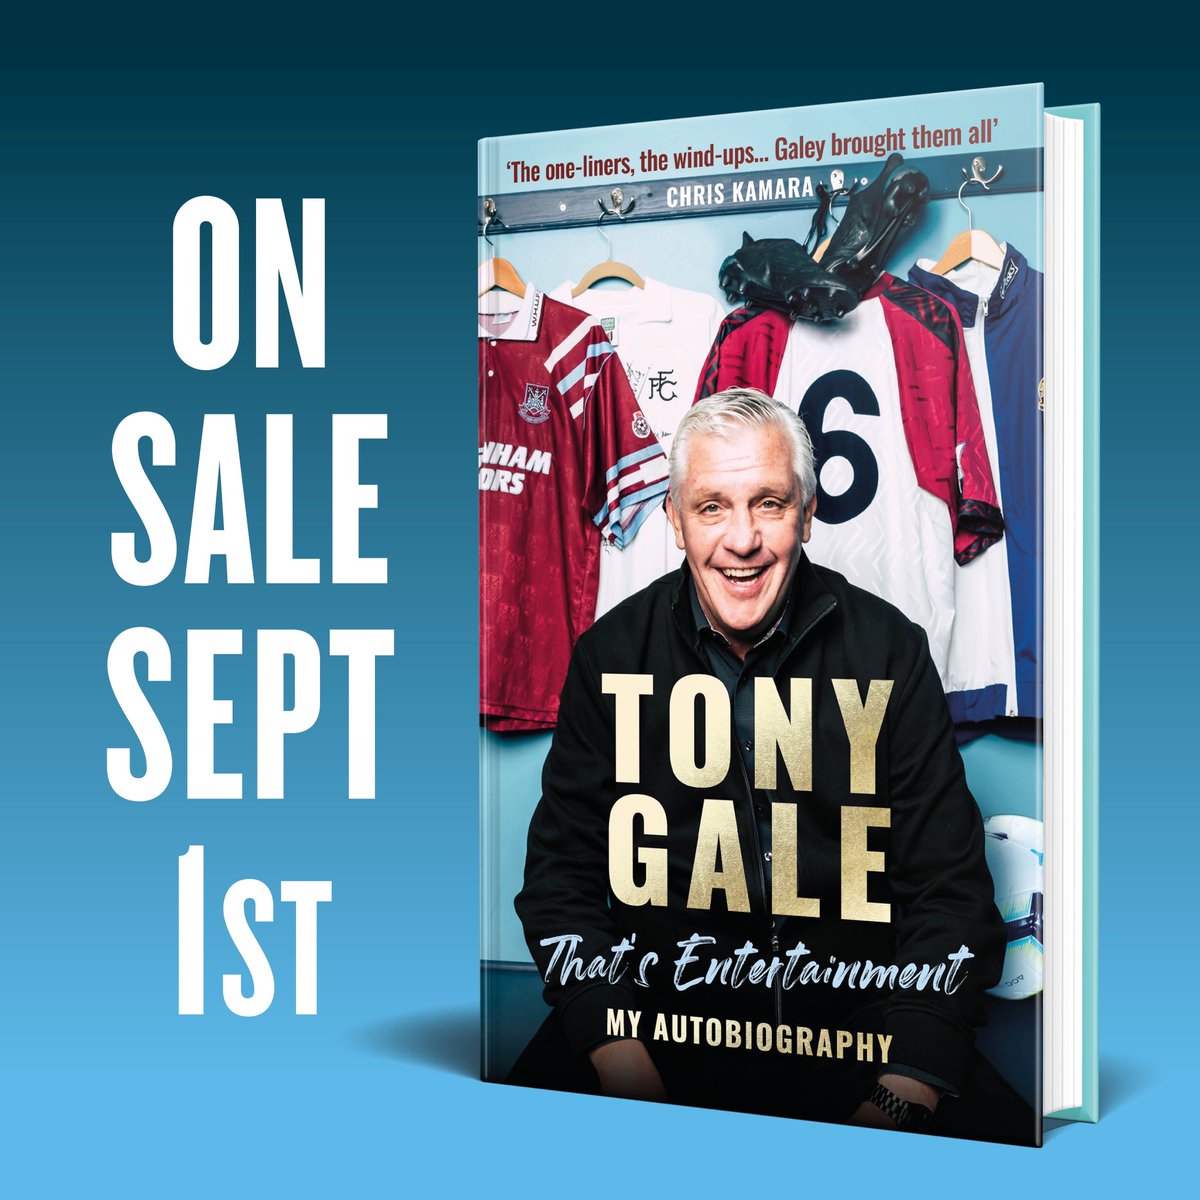 DATE FOR THE DIARY!! Tony Gale's first official book signing. Friday 1st September, 1pm, WATERSTONES LAKESIDE. 📚 🖊 Cannot wait! ⚽️⚽️⚽️ I'll be there 👍🏼⚽️